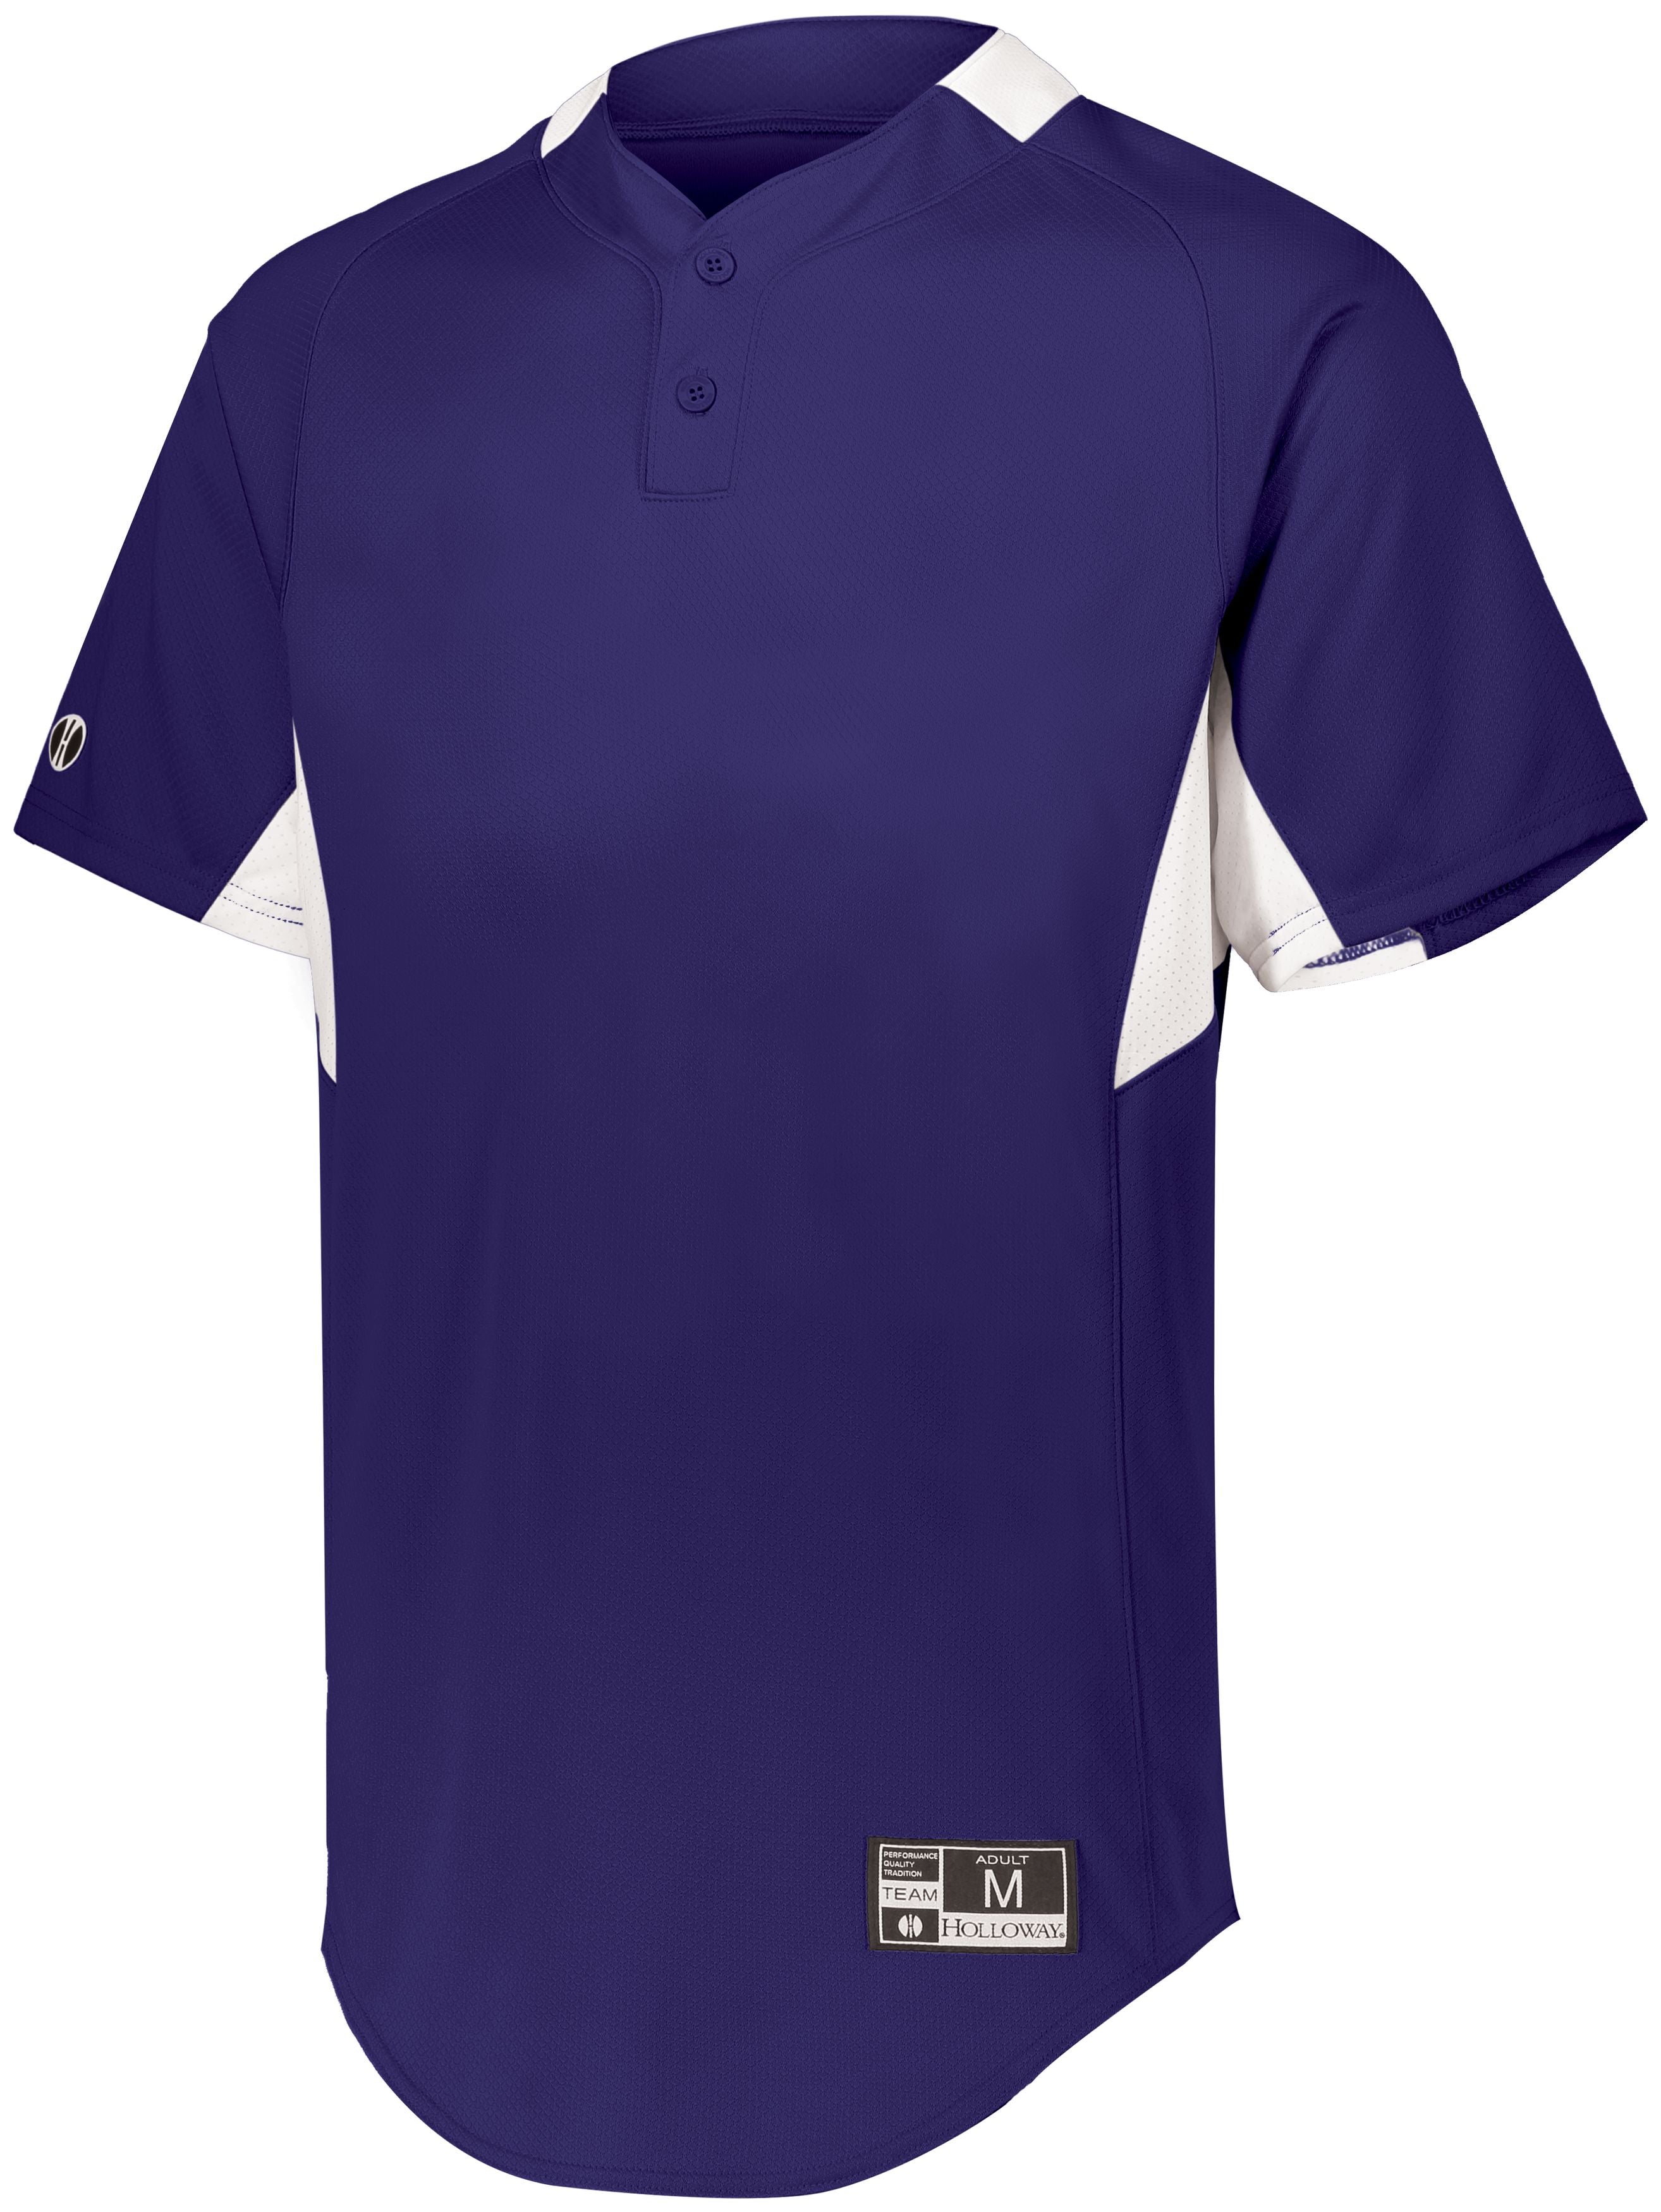 Holloway Youth  Game7 Two-Button Baseball Jersey in Purple/White  -Part of the Youth, Youth-Jersey, Baseball, Holloway, Shirts, All-Sports, All-Sports-1 product lines at KanaleyCreations.com